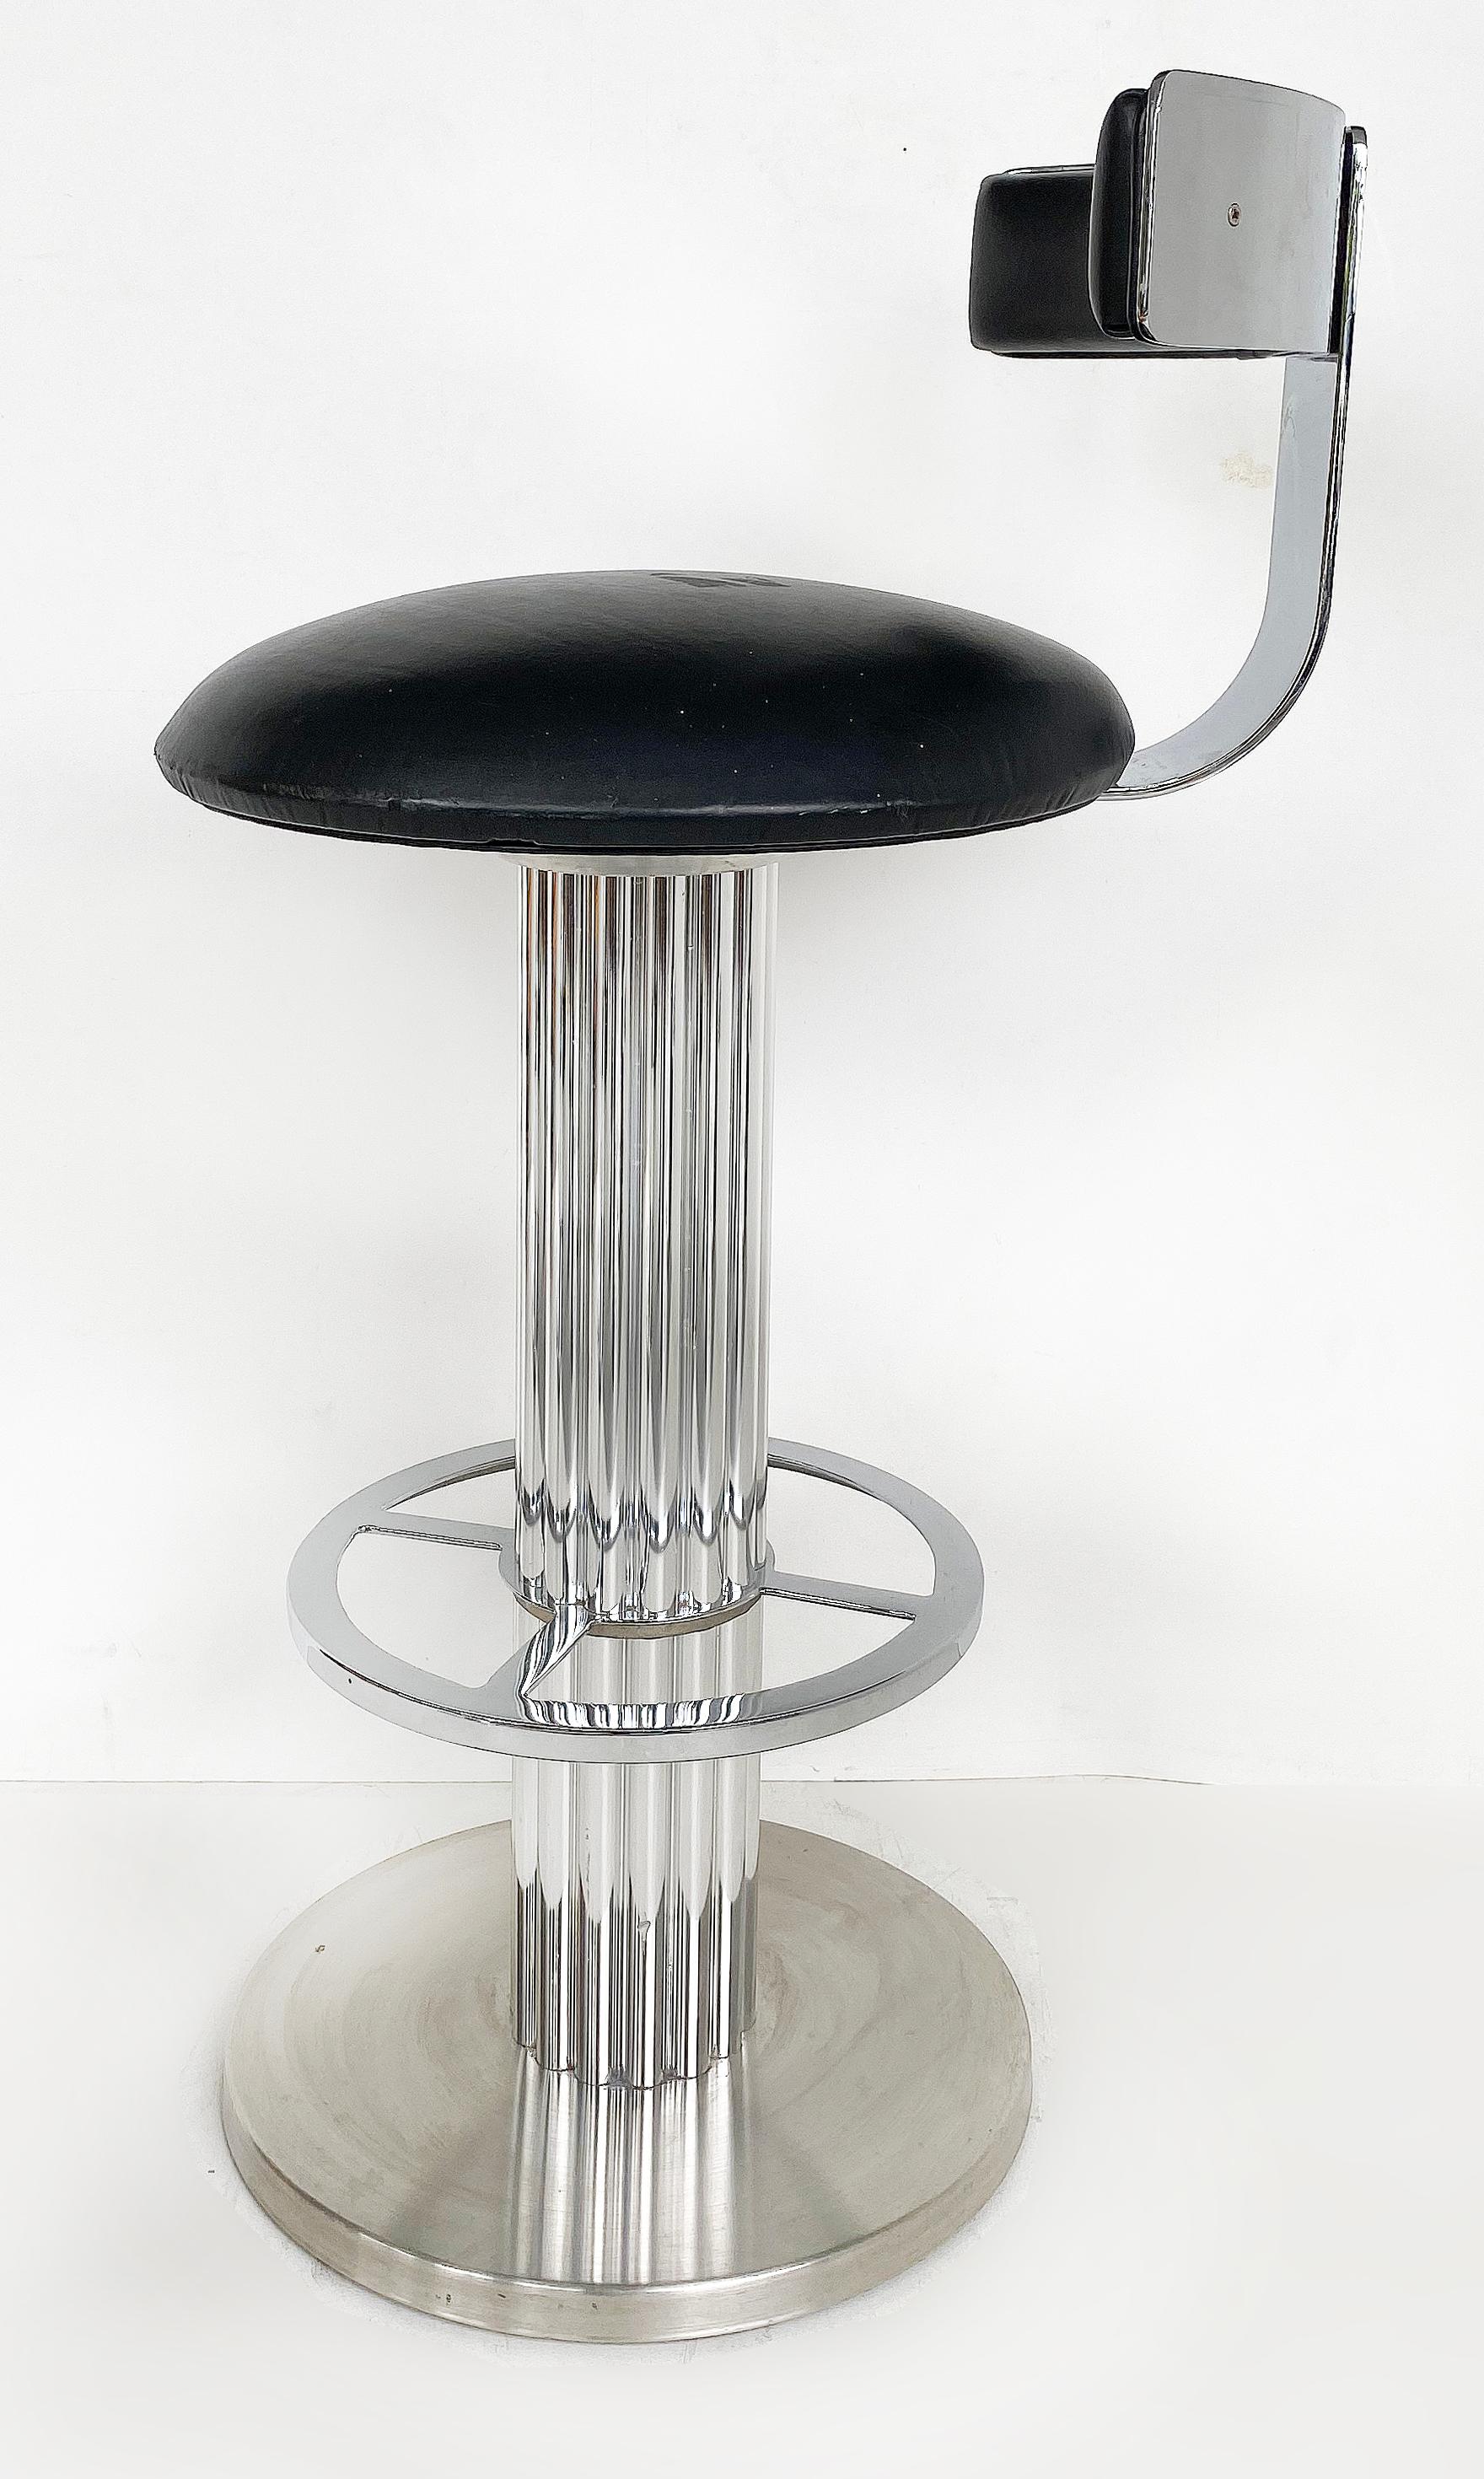 Design for Leisure Swivel Bar Stools with Chrome, Nickeled Steel, Black Leather 1